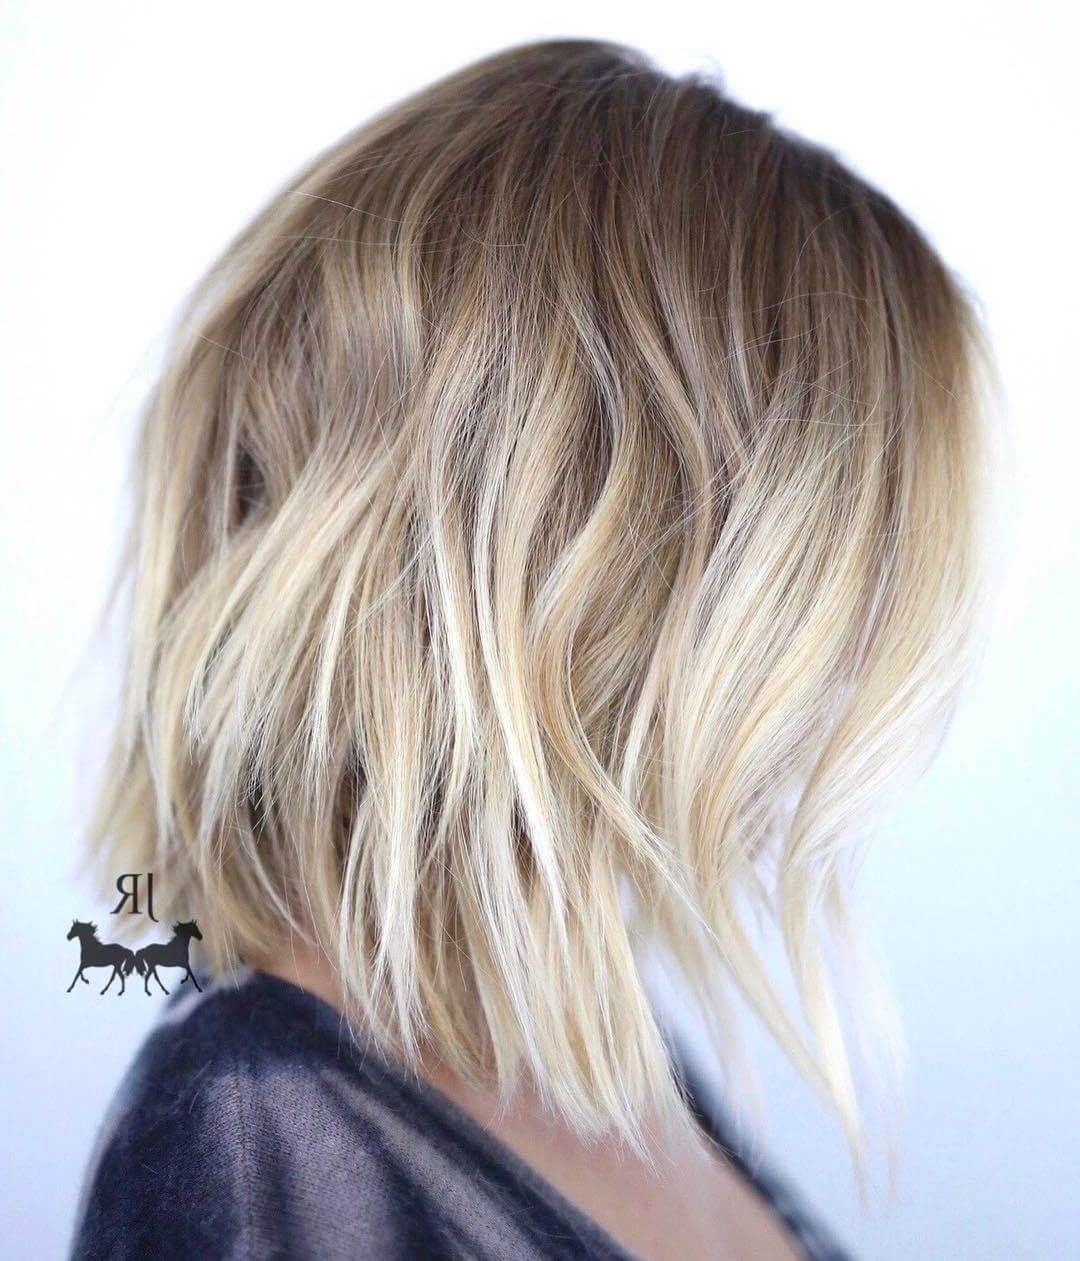 50 Fresh Short Blonde Hair Ideas To Update Your Style In 2018 Regarding Most Current Ashy Blonde Pixie Haircuts With A Messy Touch (View 6 of 15)